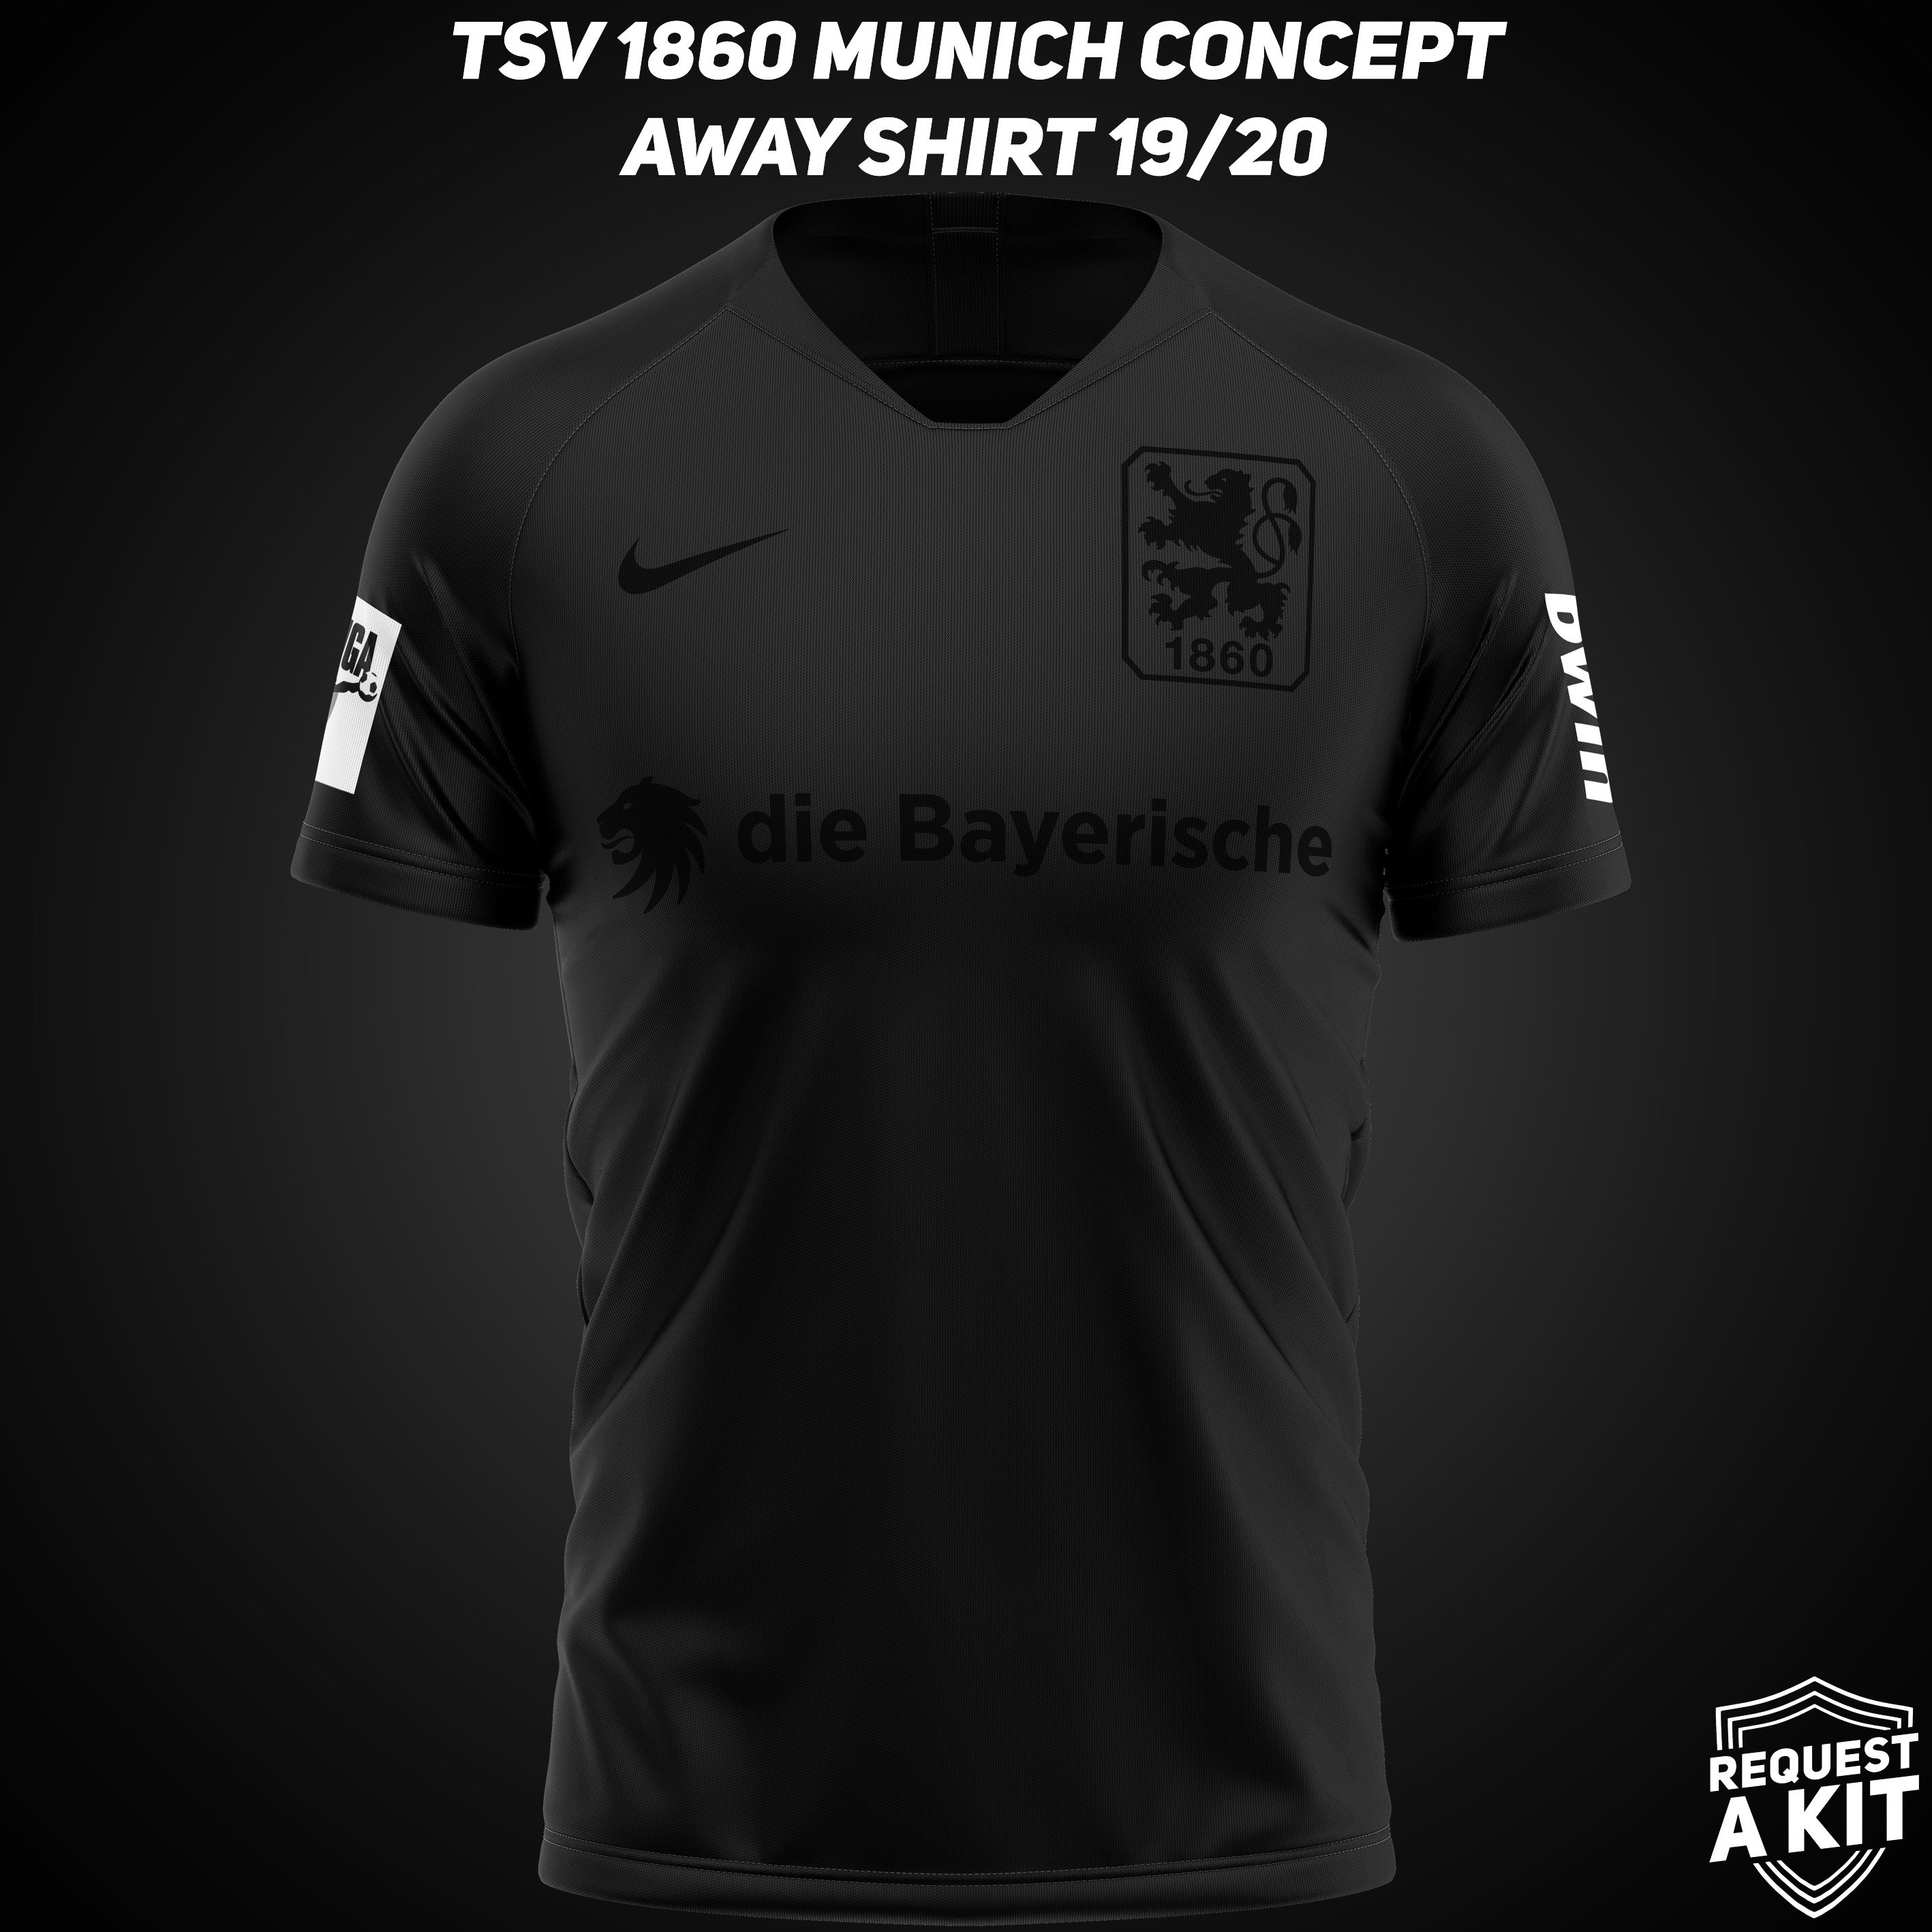 TSV 1860 München X Joma Oktoberfest Shirt Concept by NSGraphics - Football  Shirt Culture - Latest Football Kit News and More